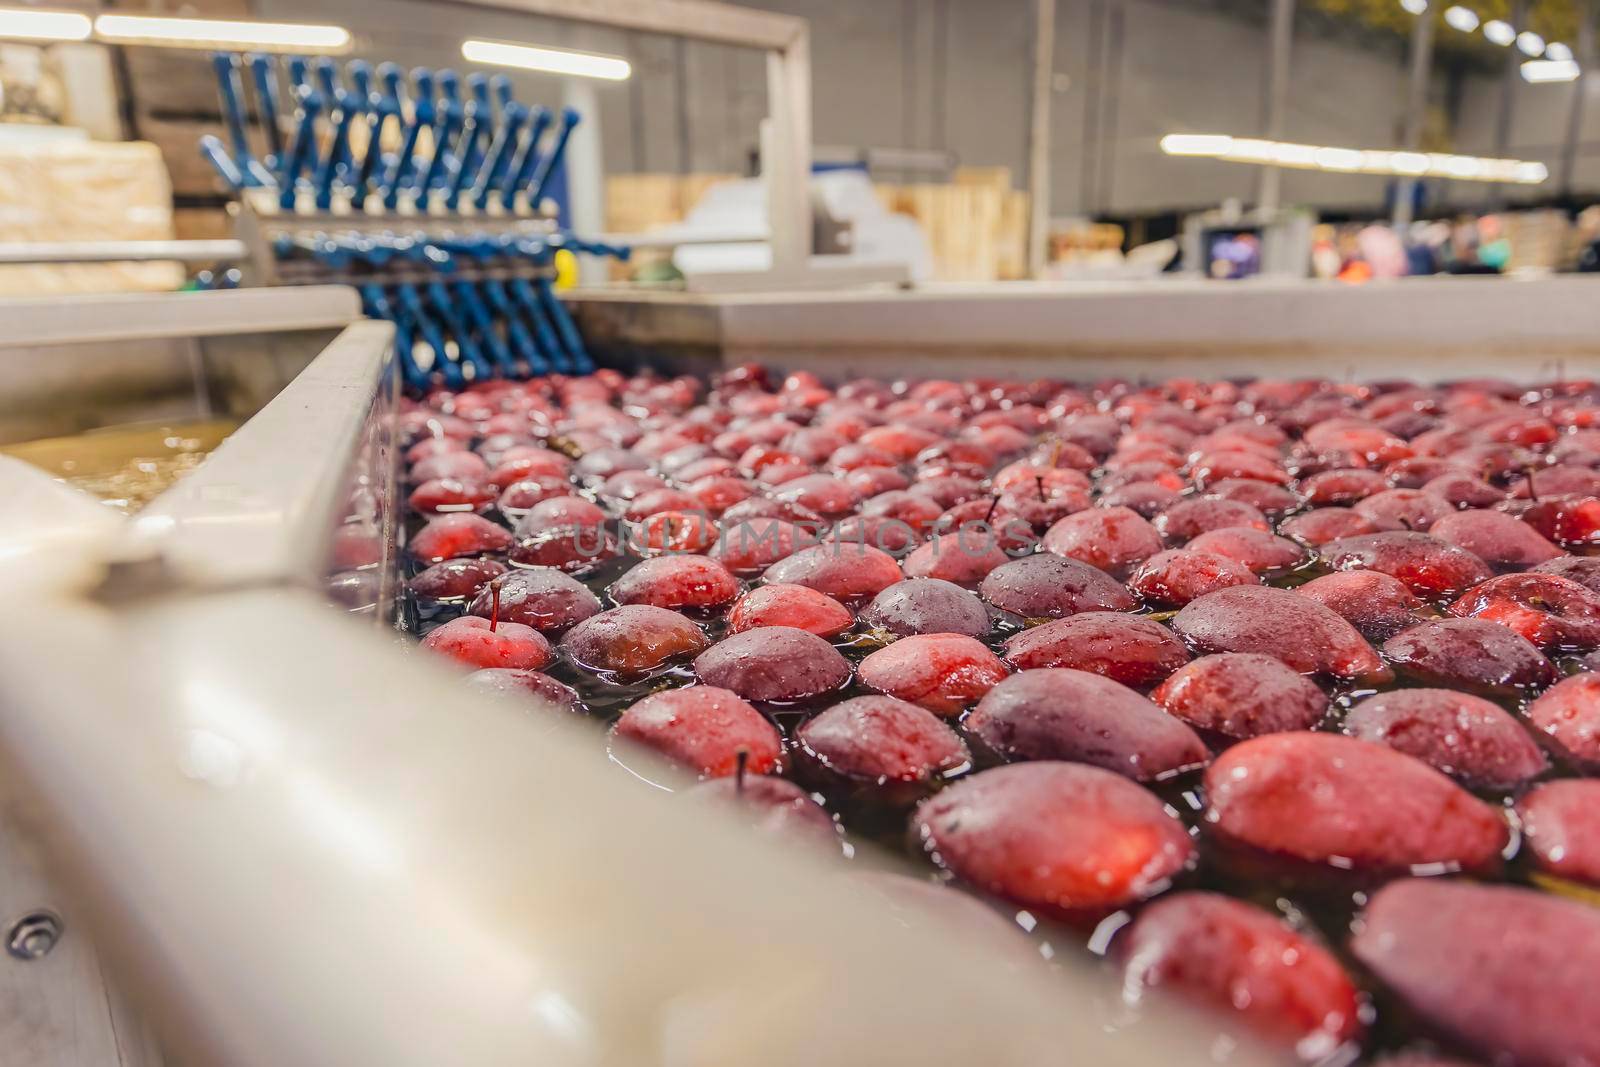 washing red apples in large quantities for further transfer to the packaging line, close-up